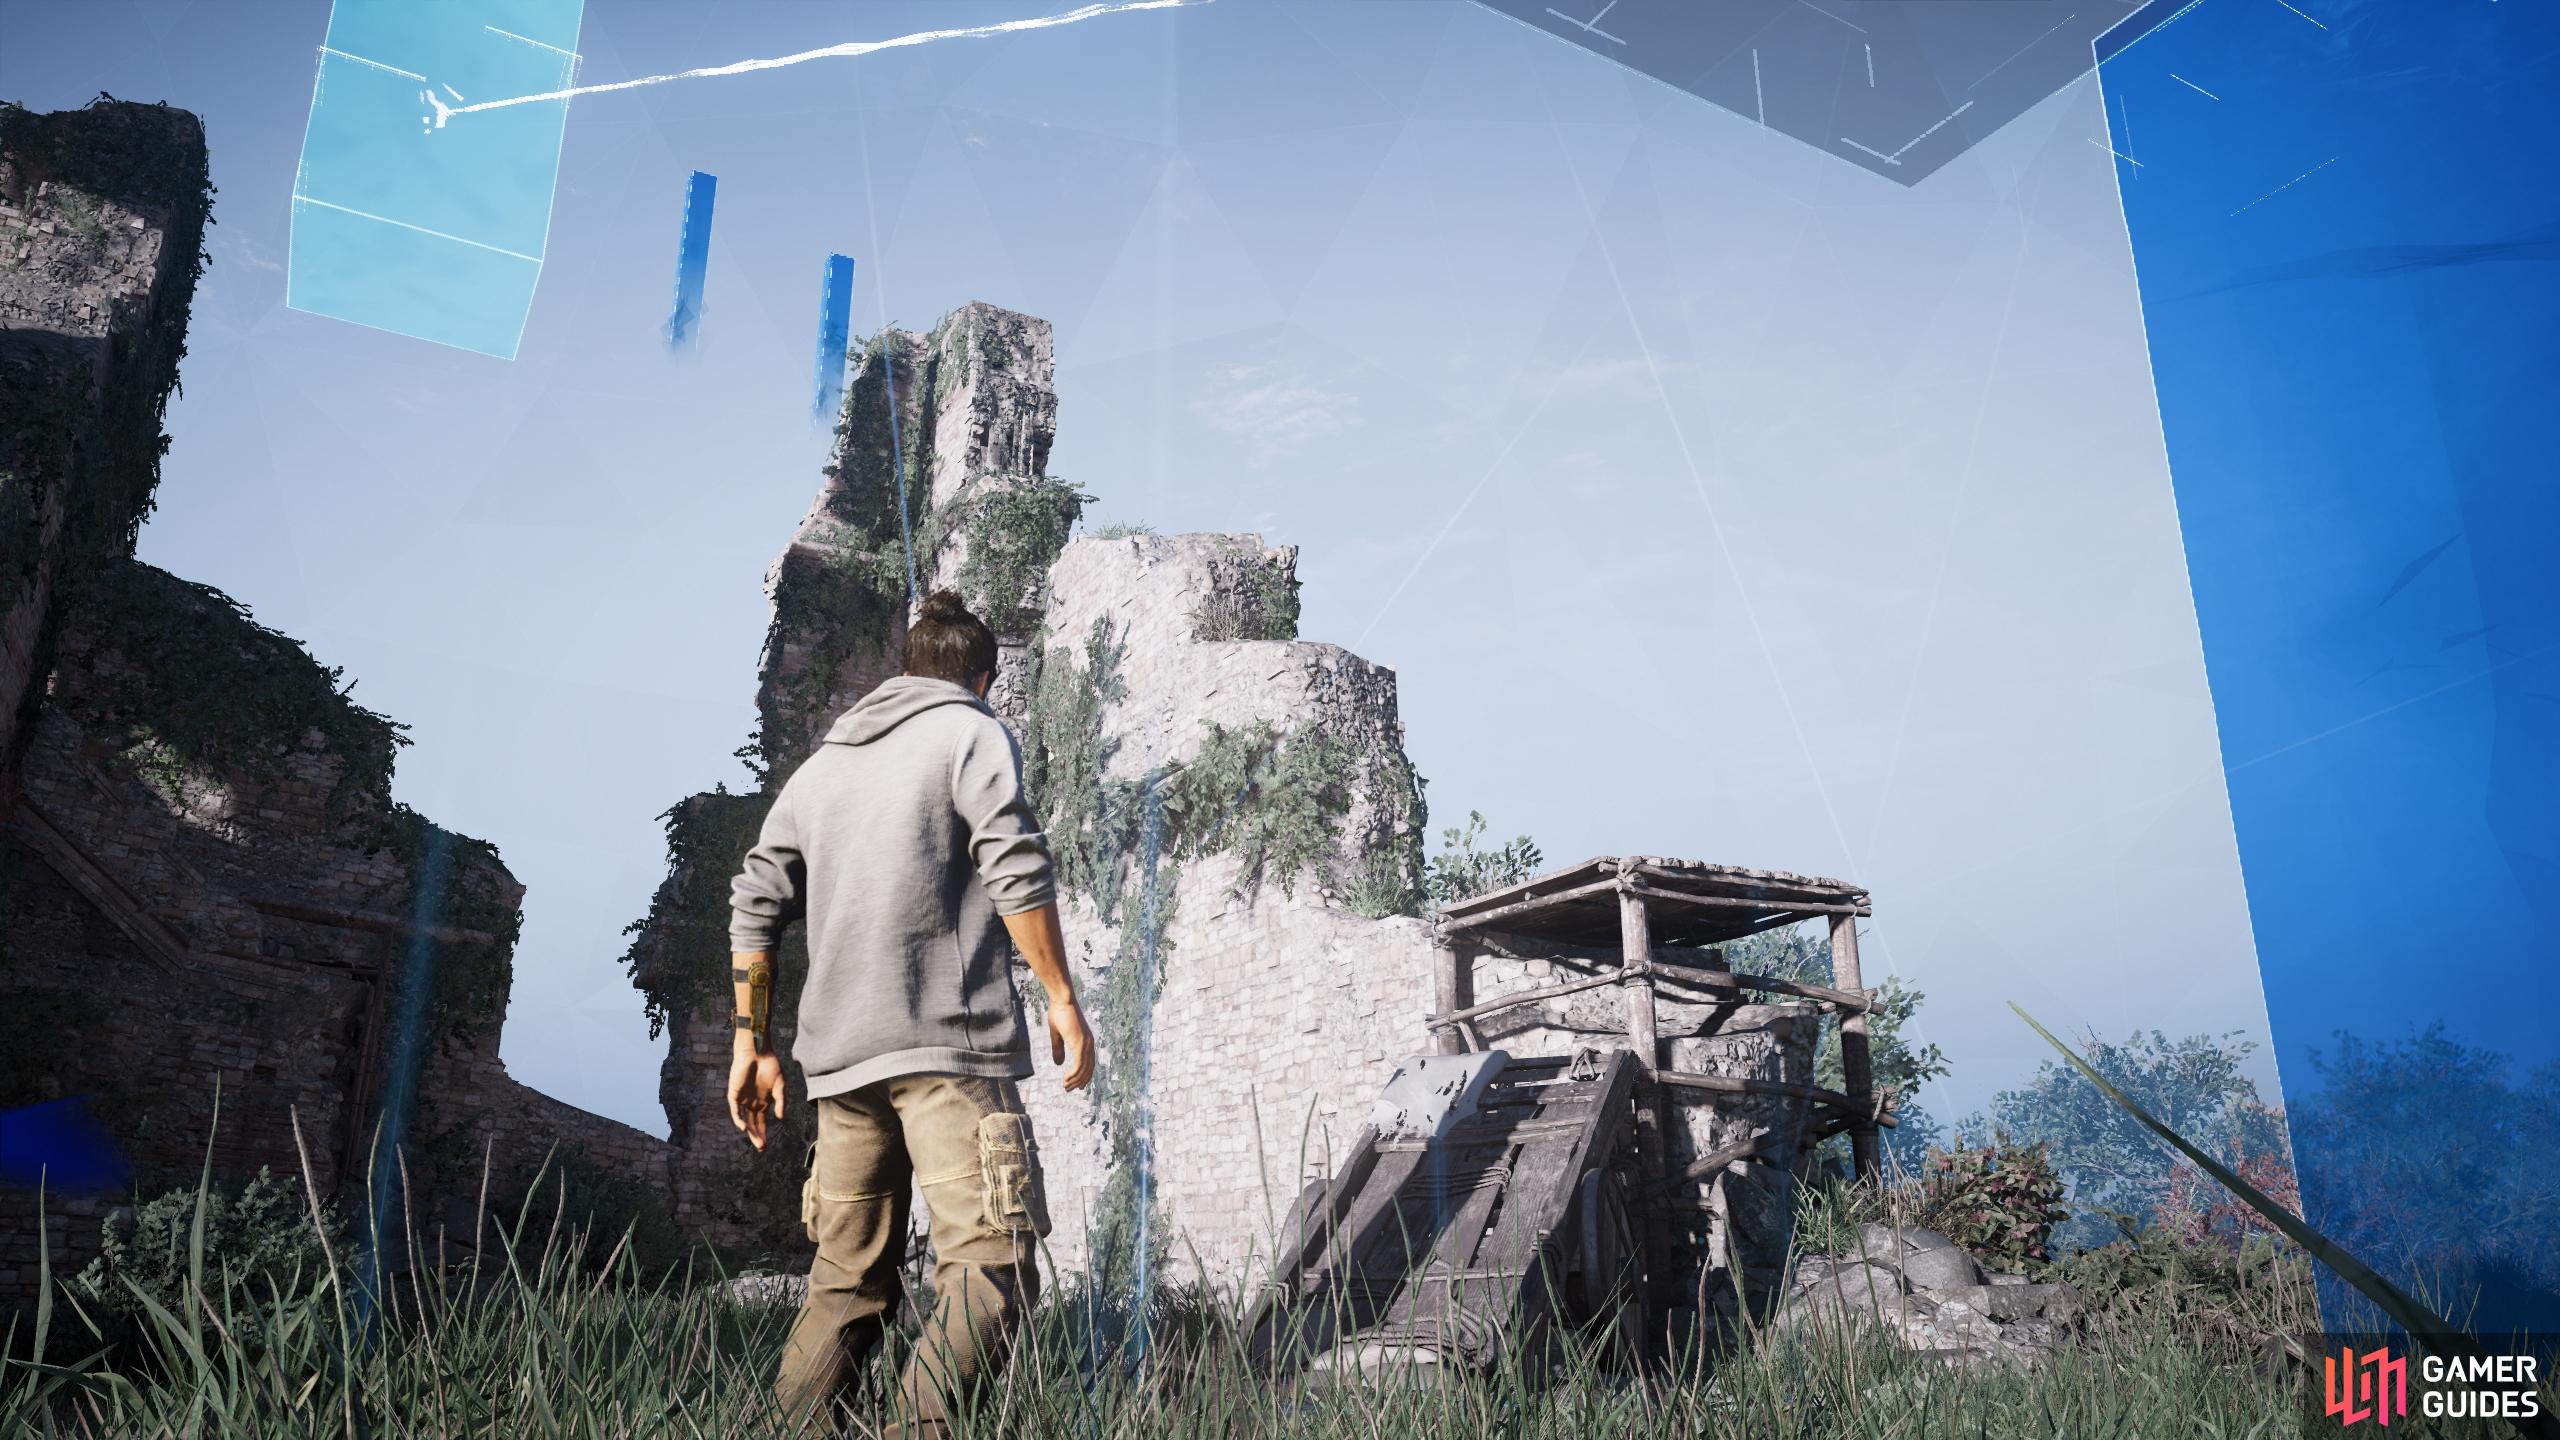 When you hear the unknown voices, you can climb the ruins to the top of the anomaly.